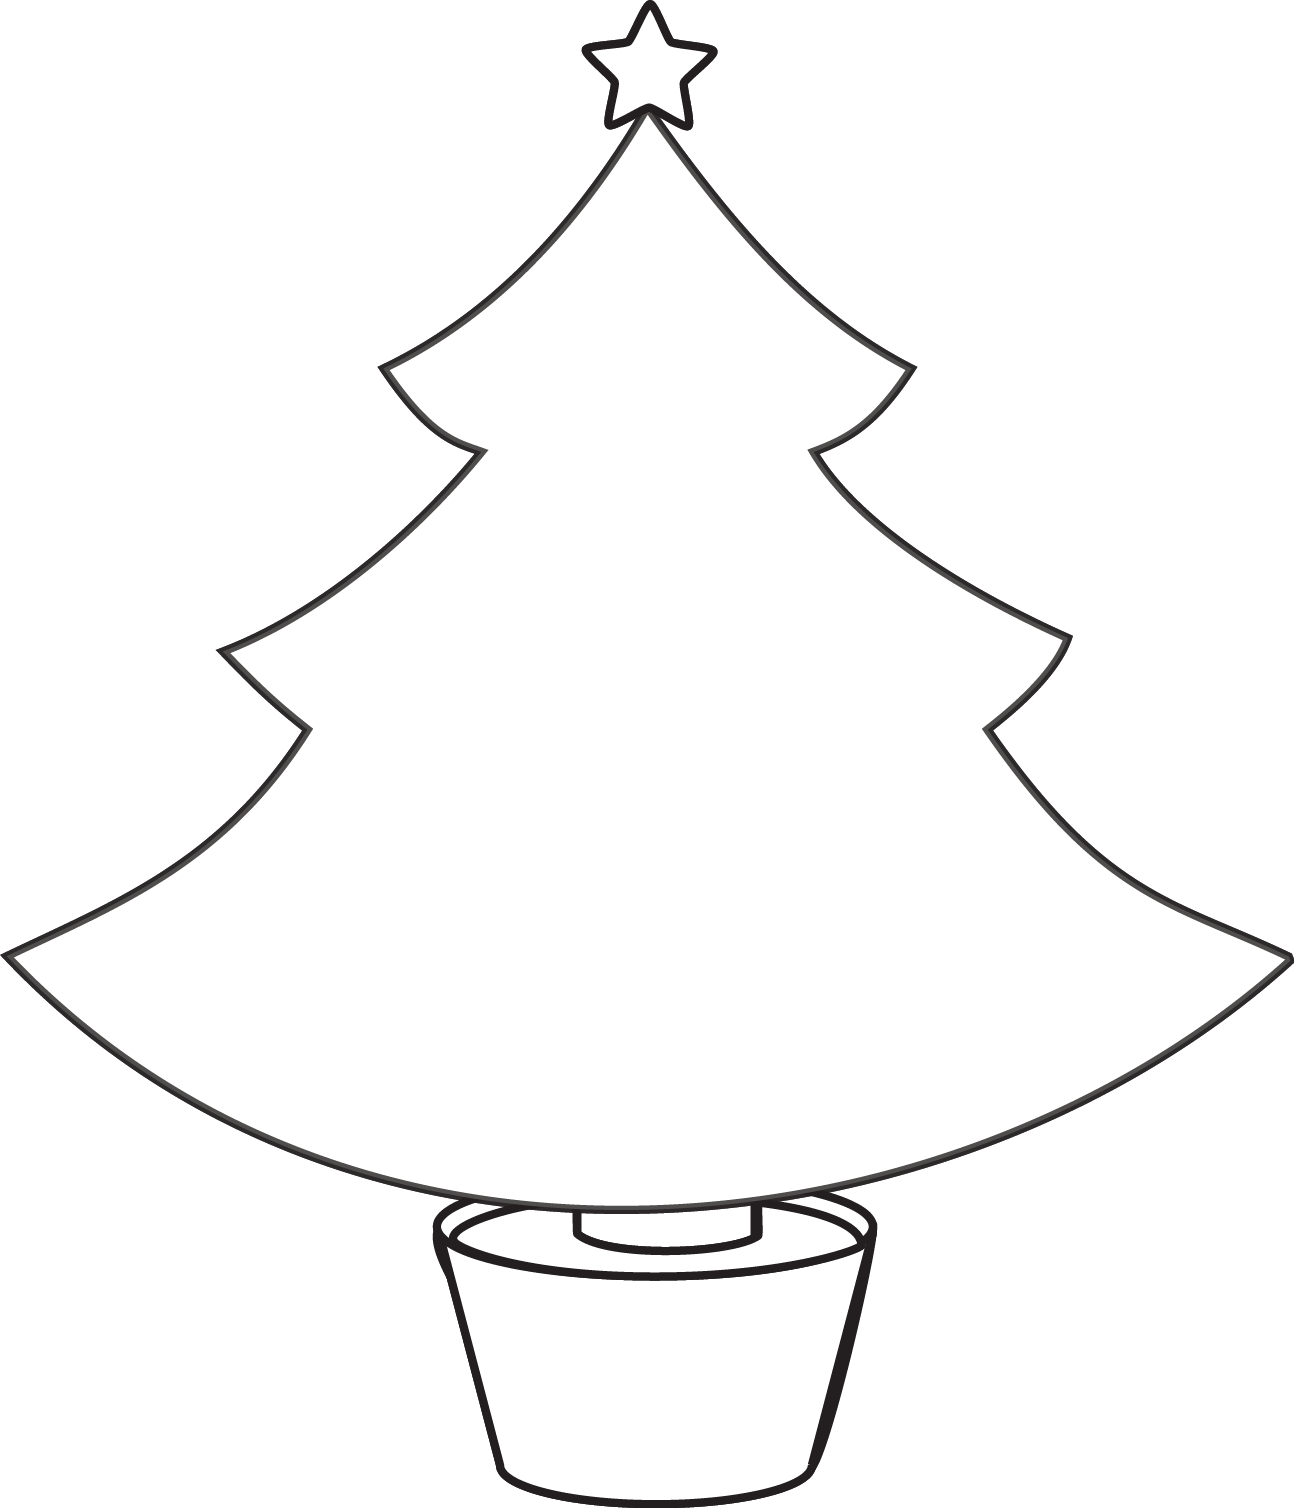 Christmas tree outline clipart